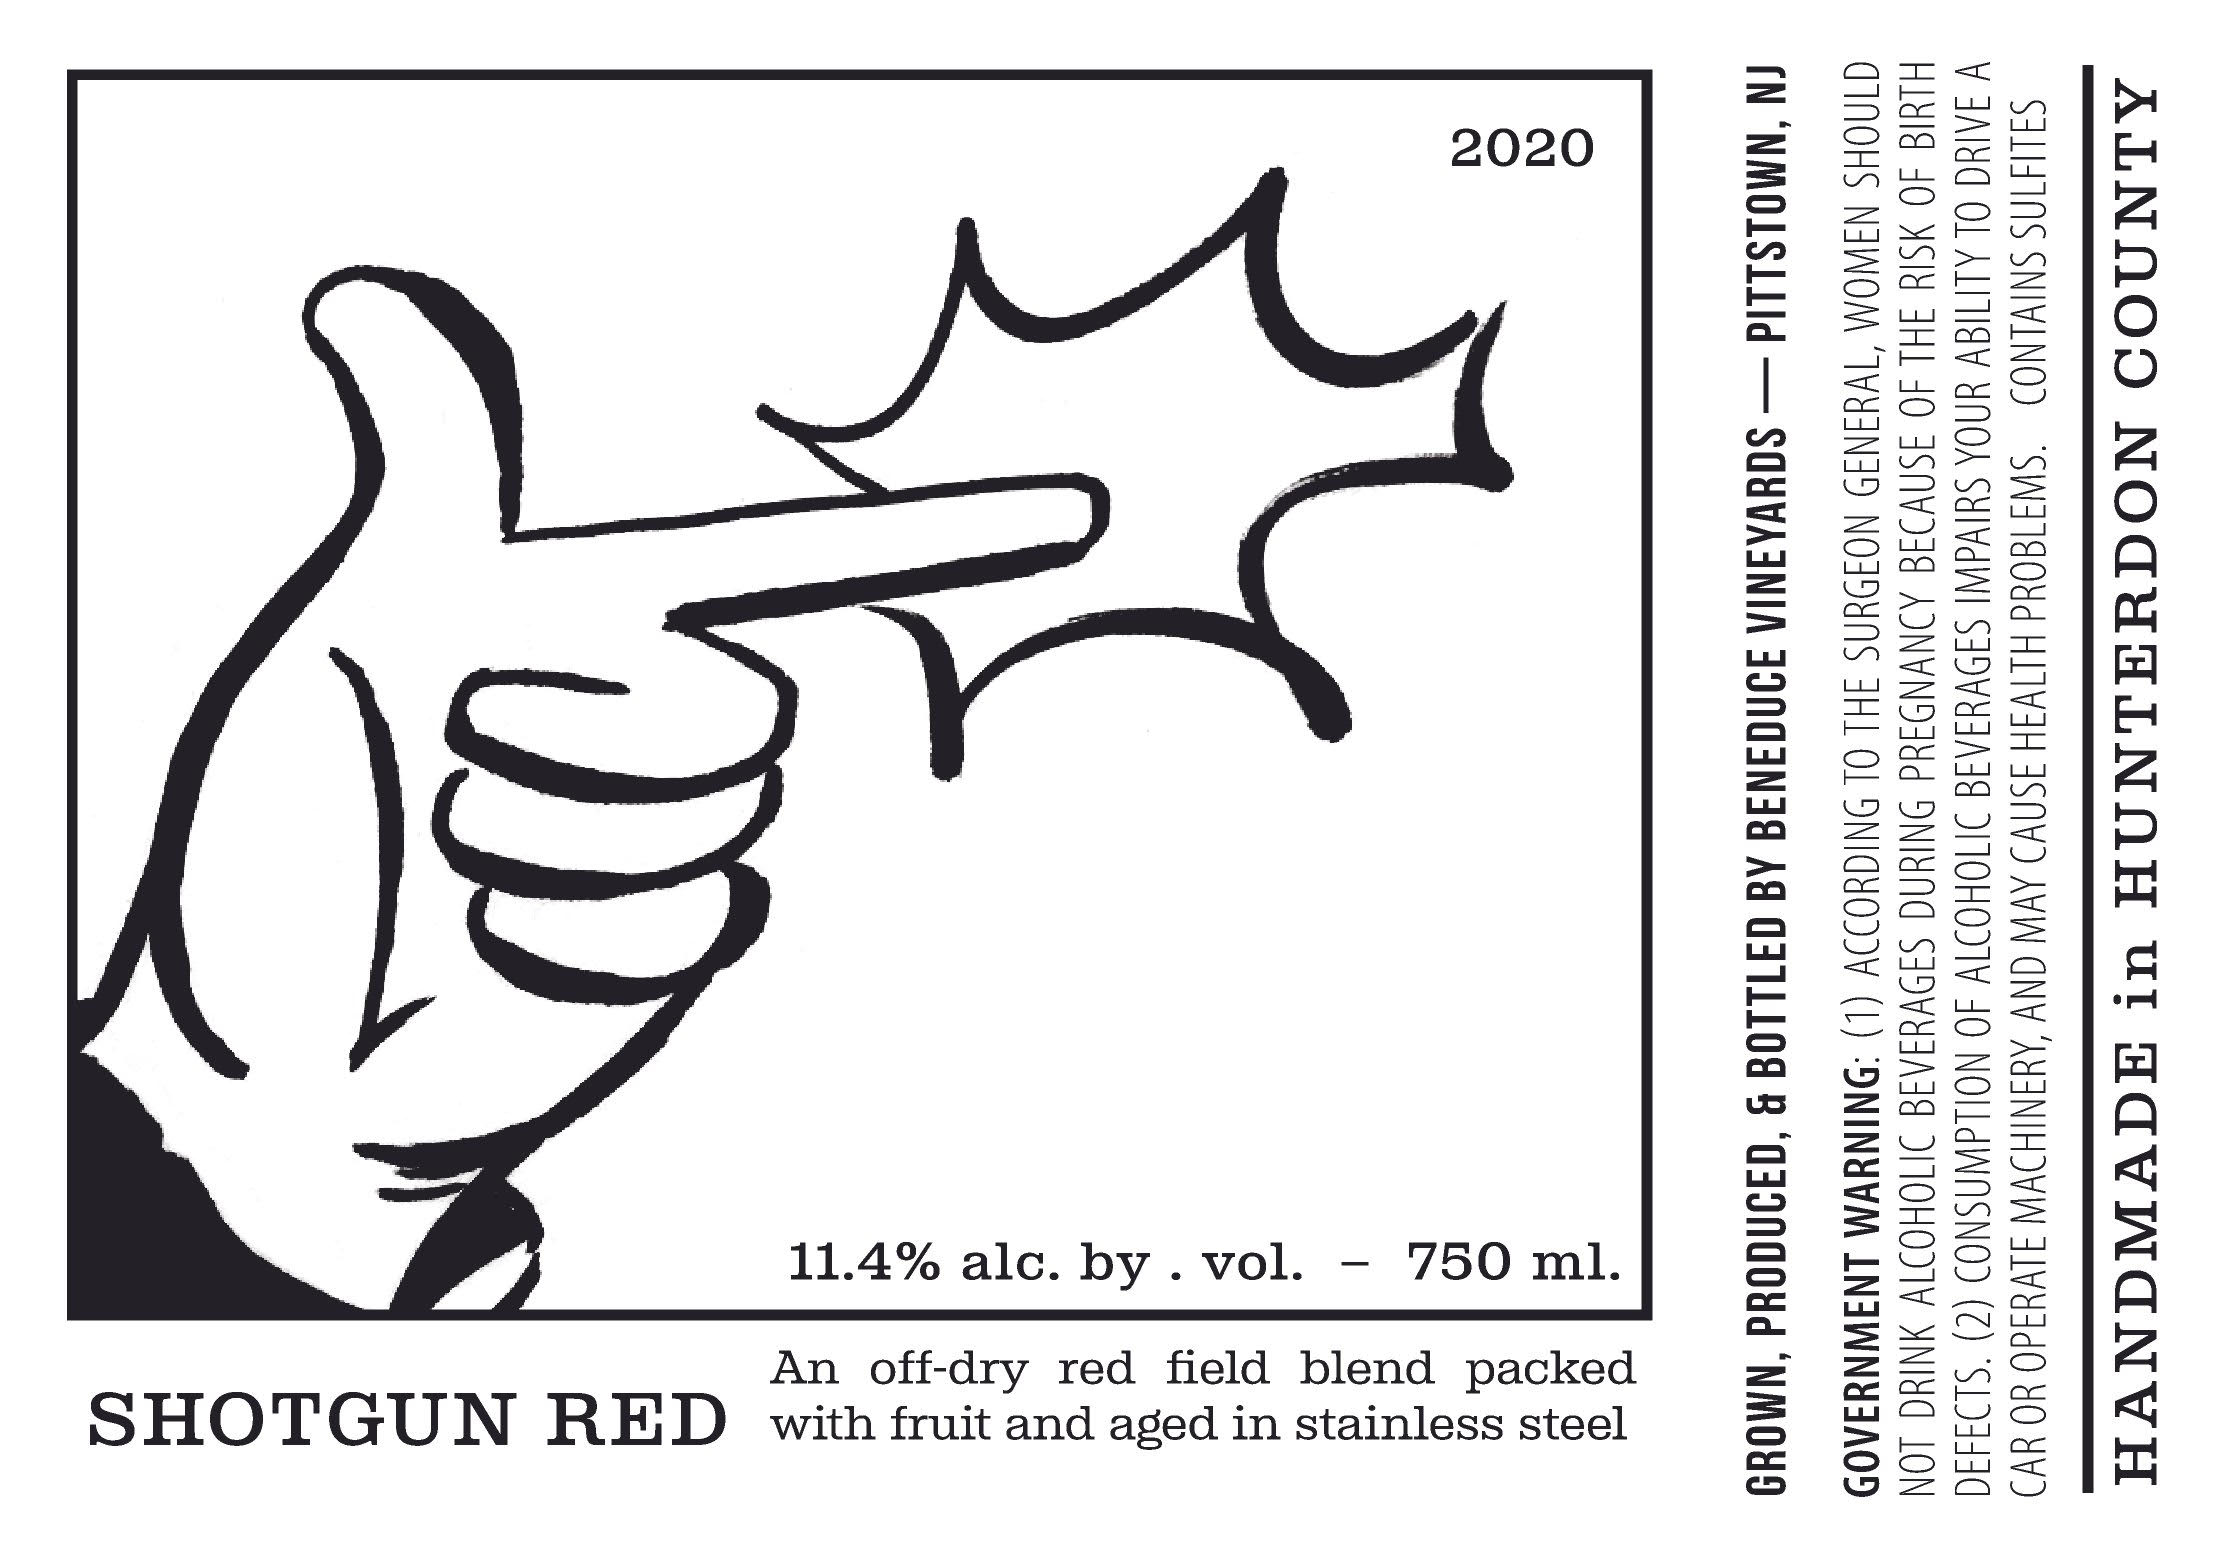 Product Image for 2020 Shotgun Red